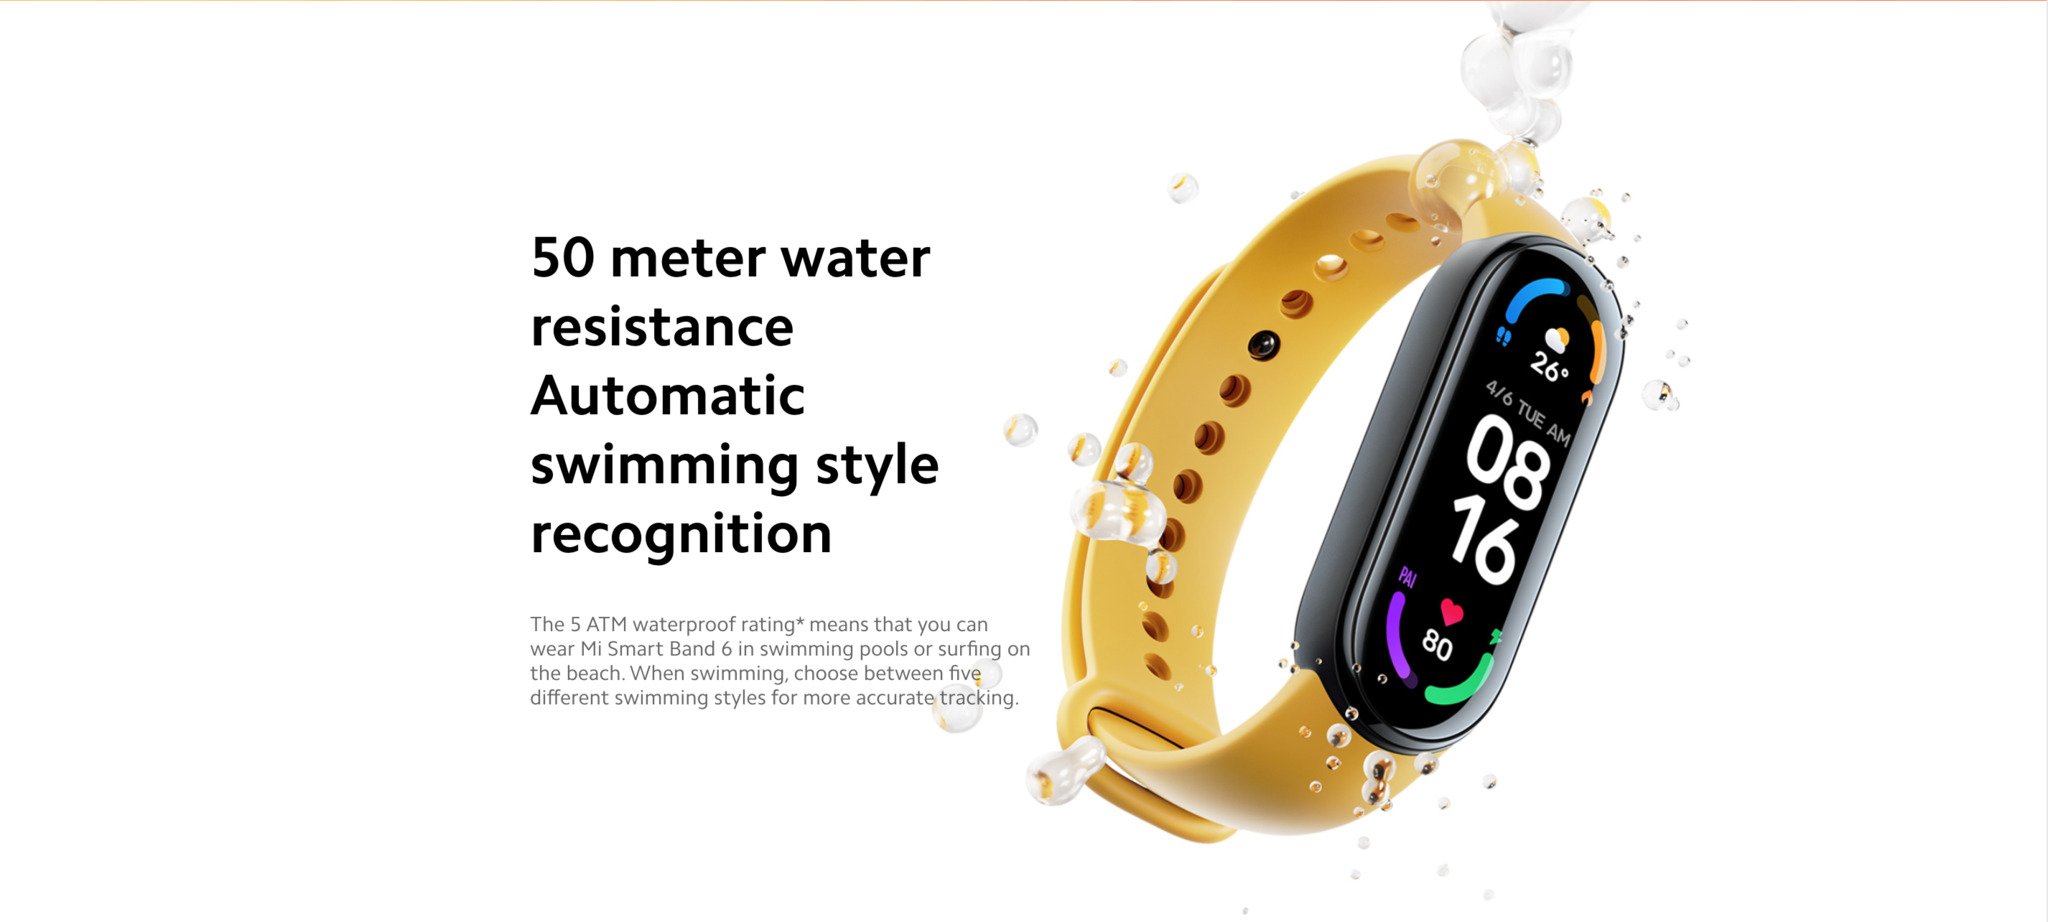 Xiaomi Mi Smart Band 6 - 1.56'' AMOLED Touch Screen, SPO2, Sleep Breathing Tracking, 5ATM Water Resistant, 14 Days Battery Life, 30 Sports Mode, Fitness, Steps, Sleep, Heart Rate Monitor